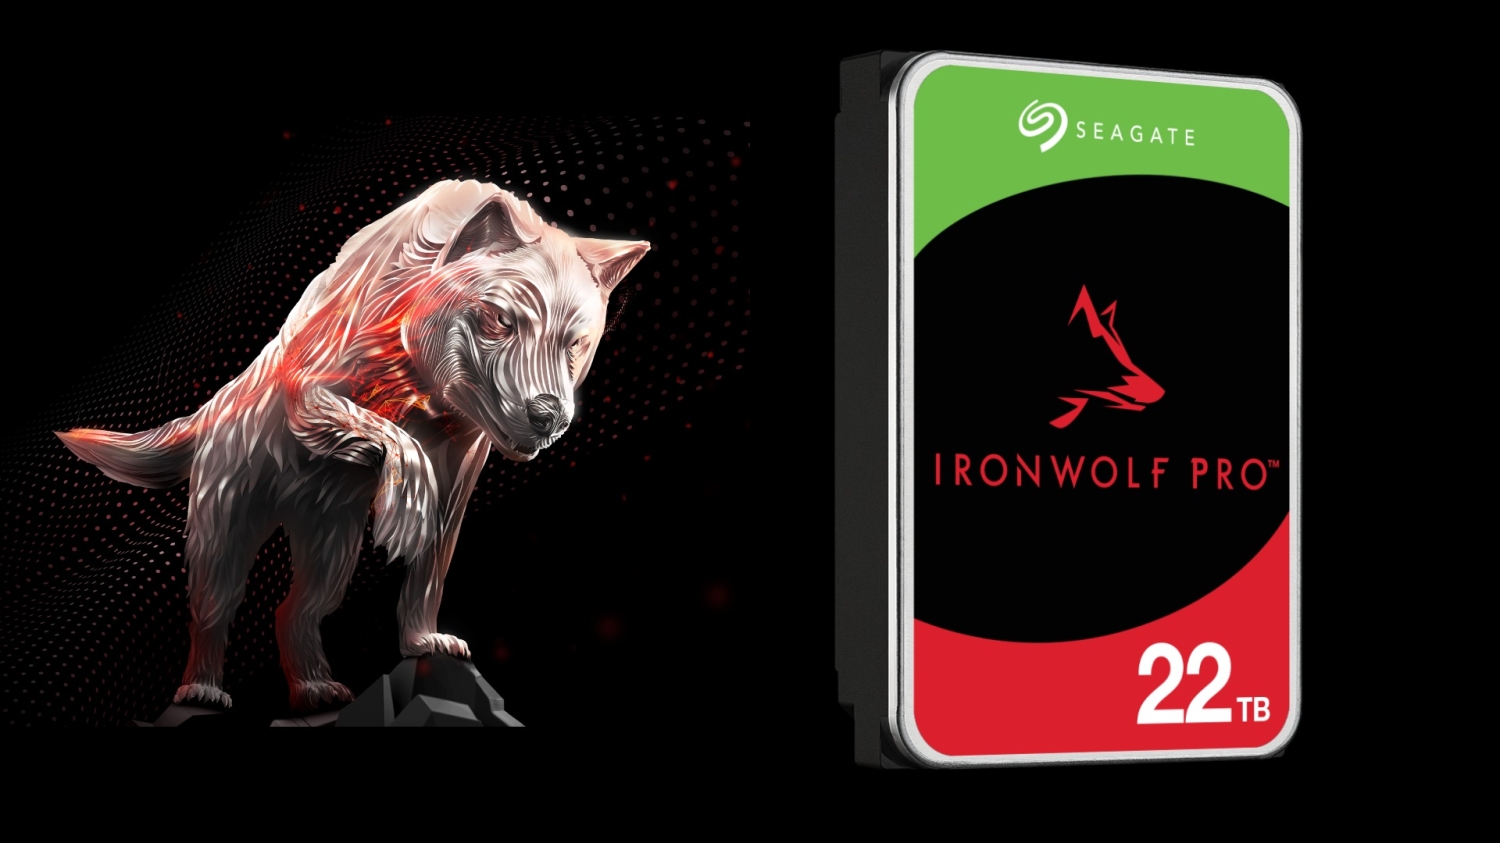 Seagate's new 22TB IronWolf Pro is the company's highest-capacity